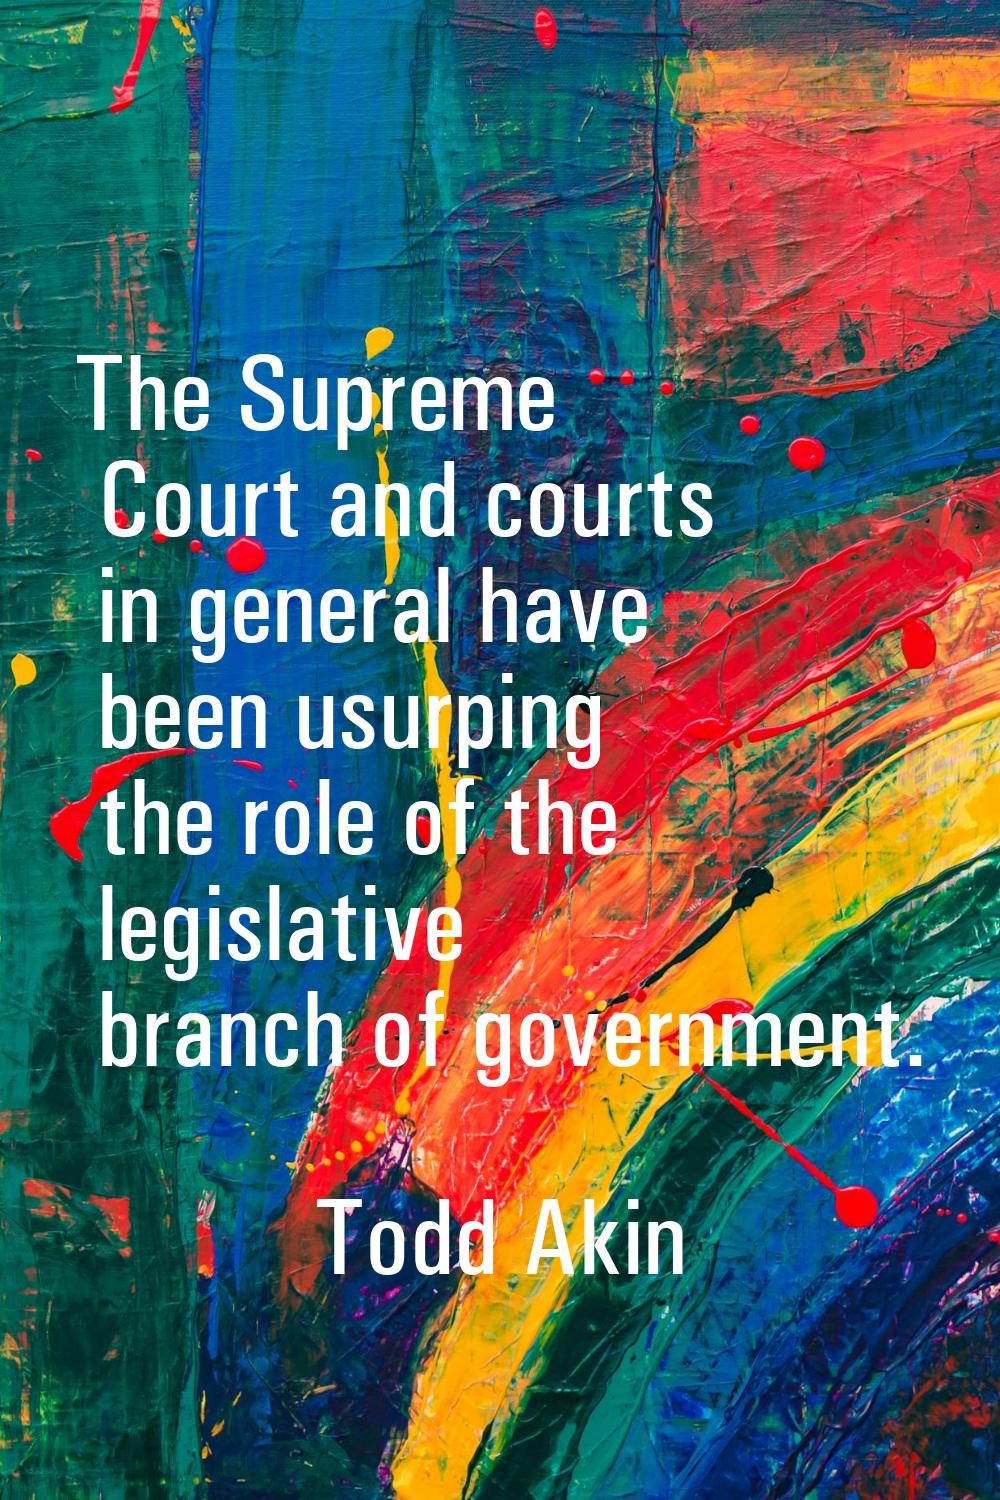 The Supreme Court and courts in general have been usurping the role of the legislative branch of go